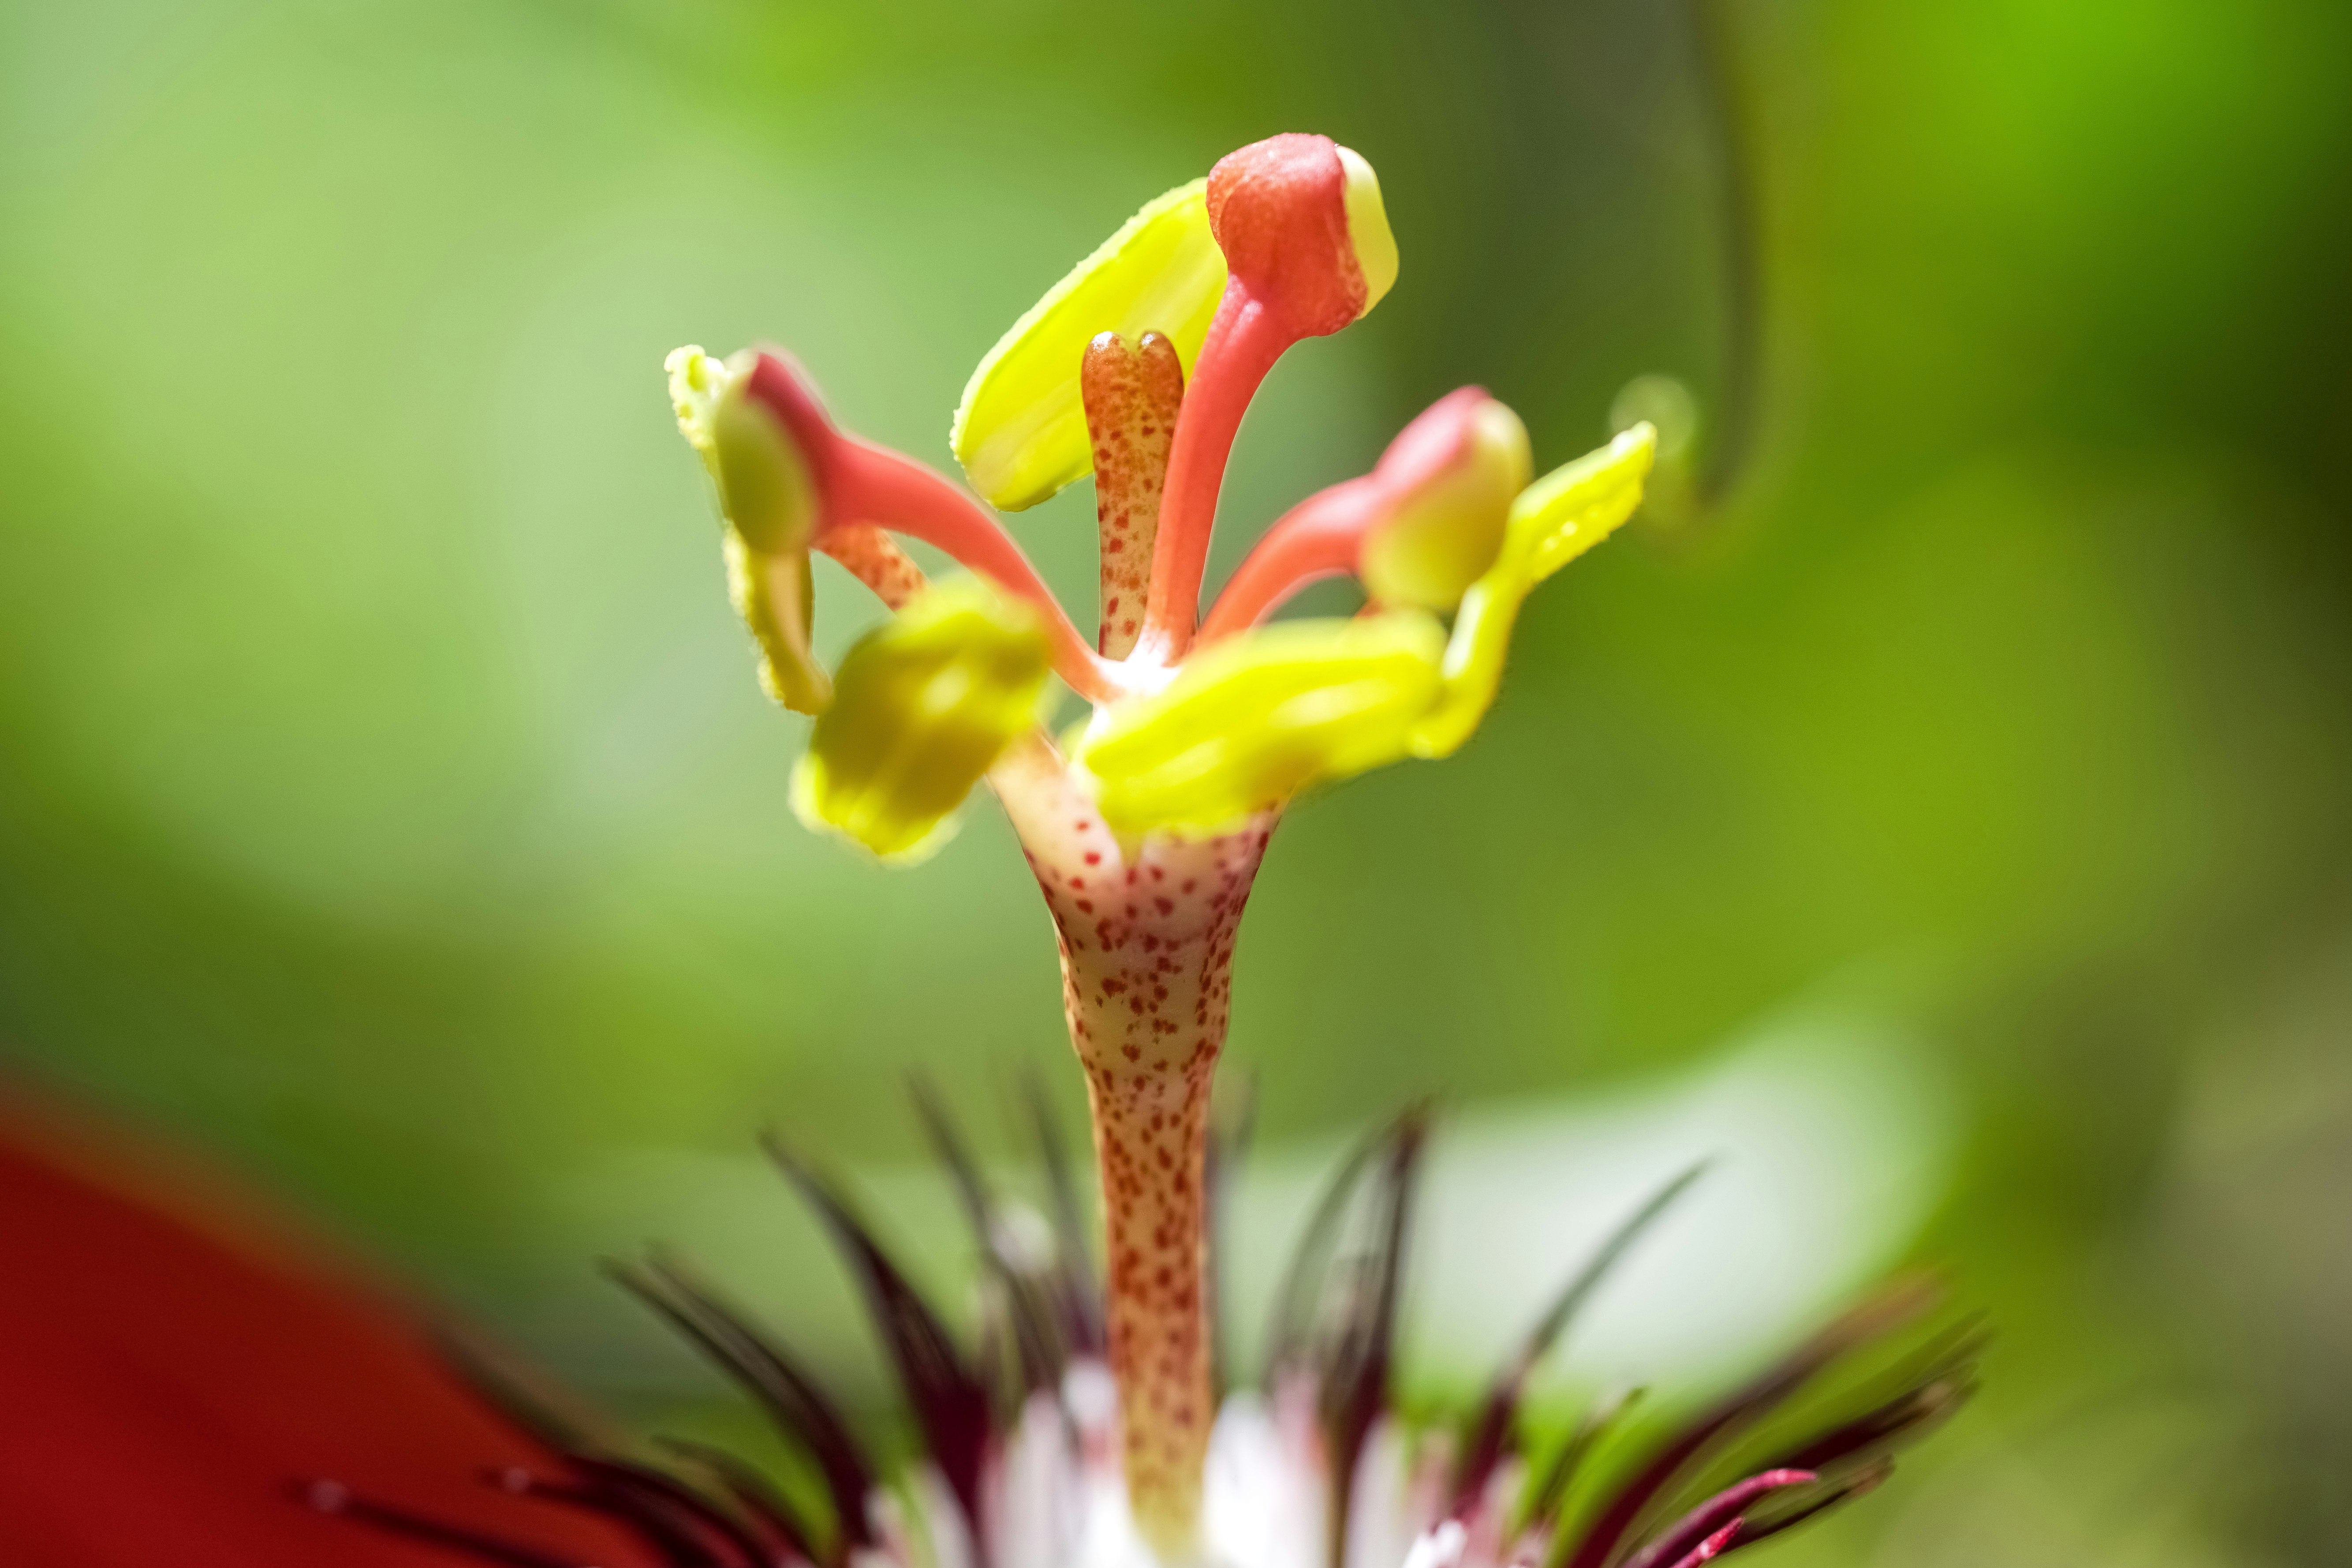 yellow and red flower in macro lens photography